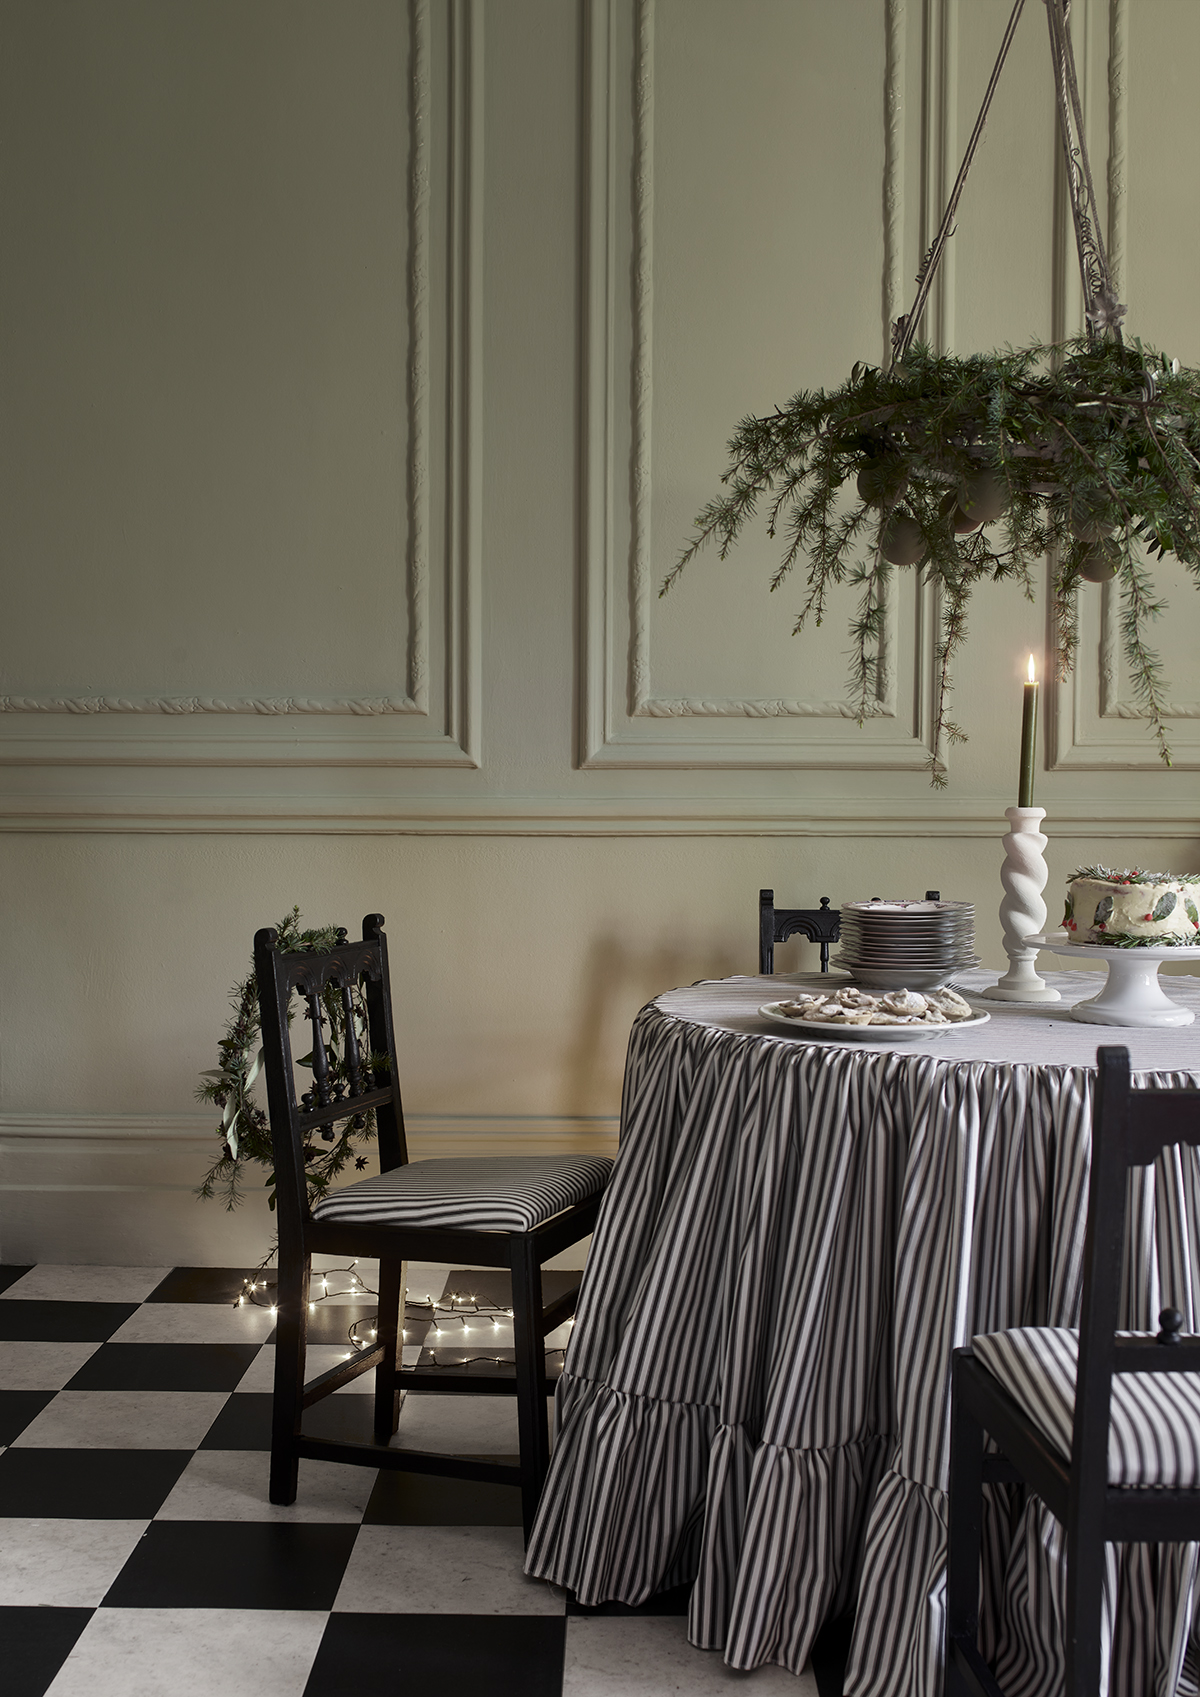 Annie Sloan wall paint used in Christmas dining backdrop